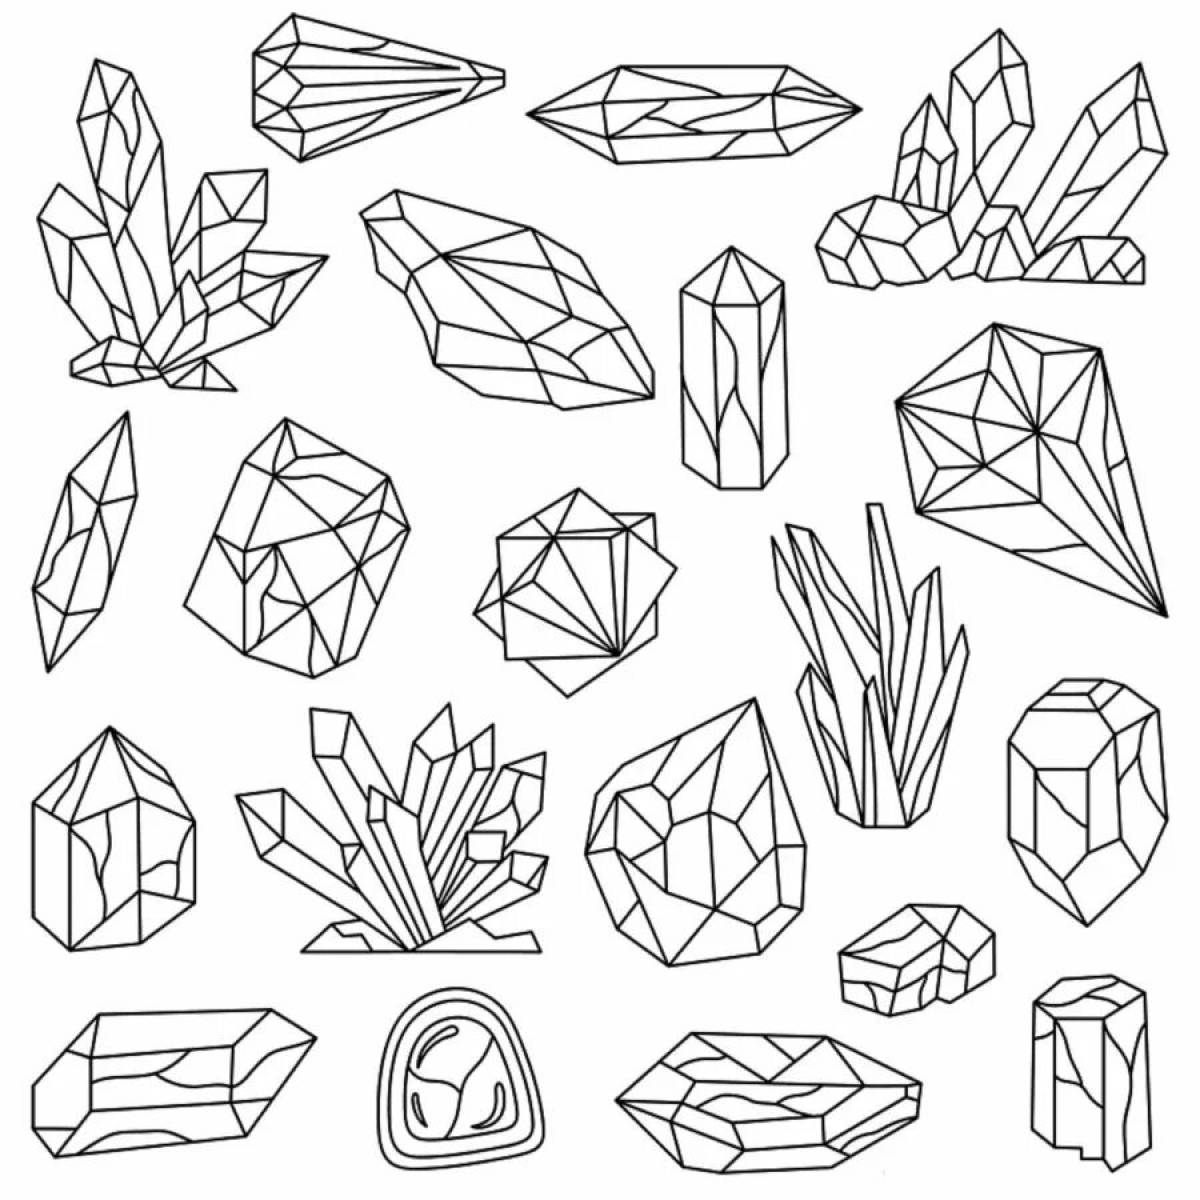 Peace crystals coloring book for kids